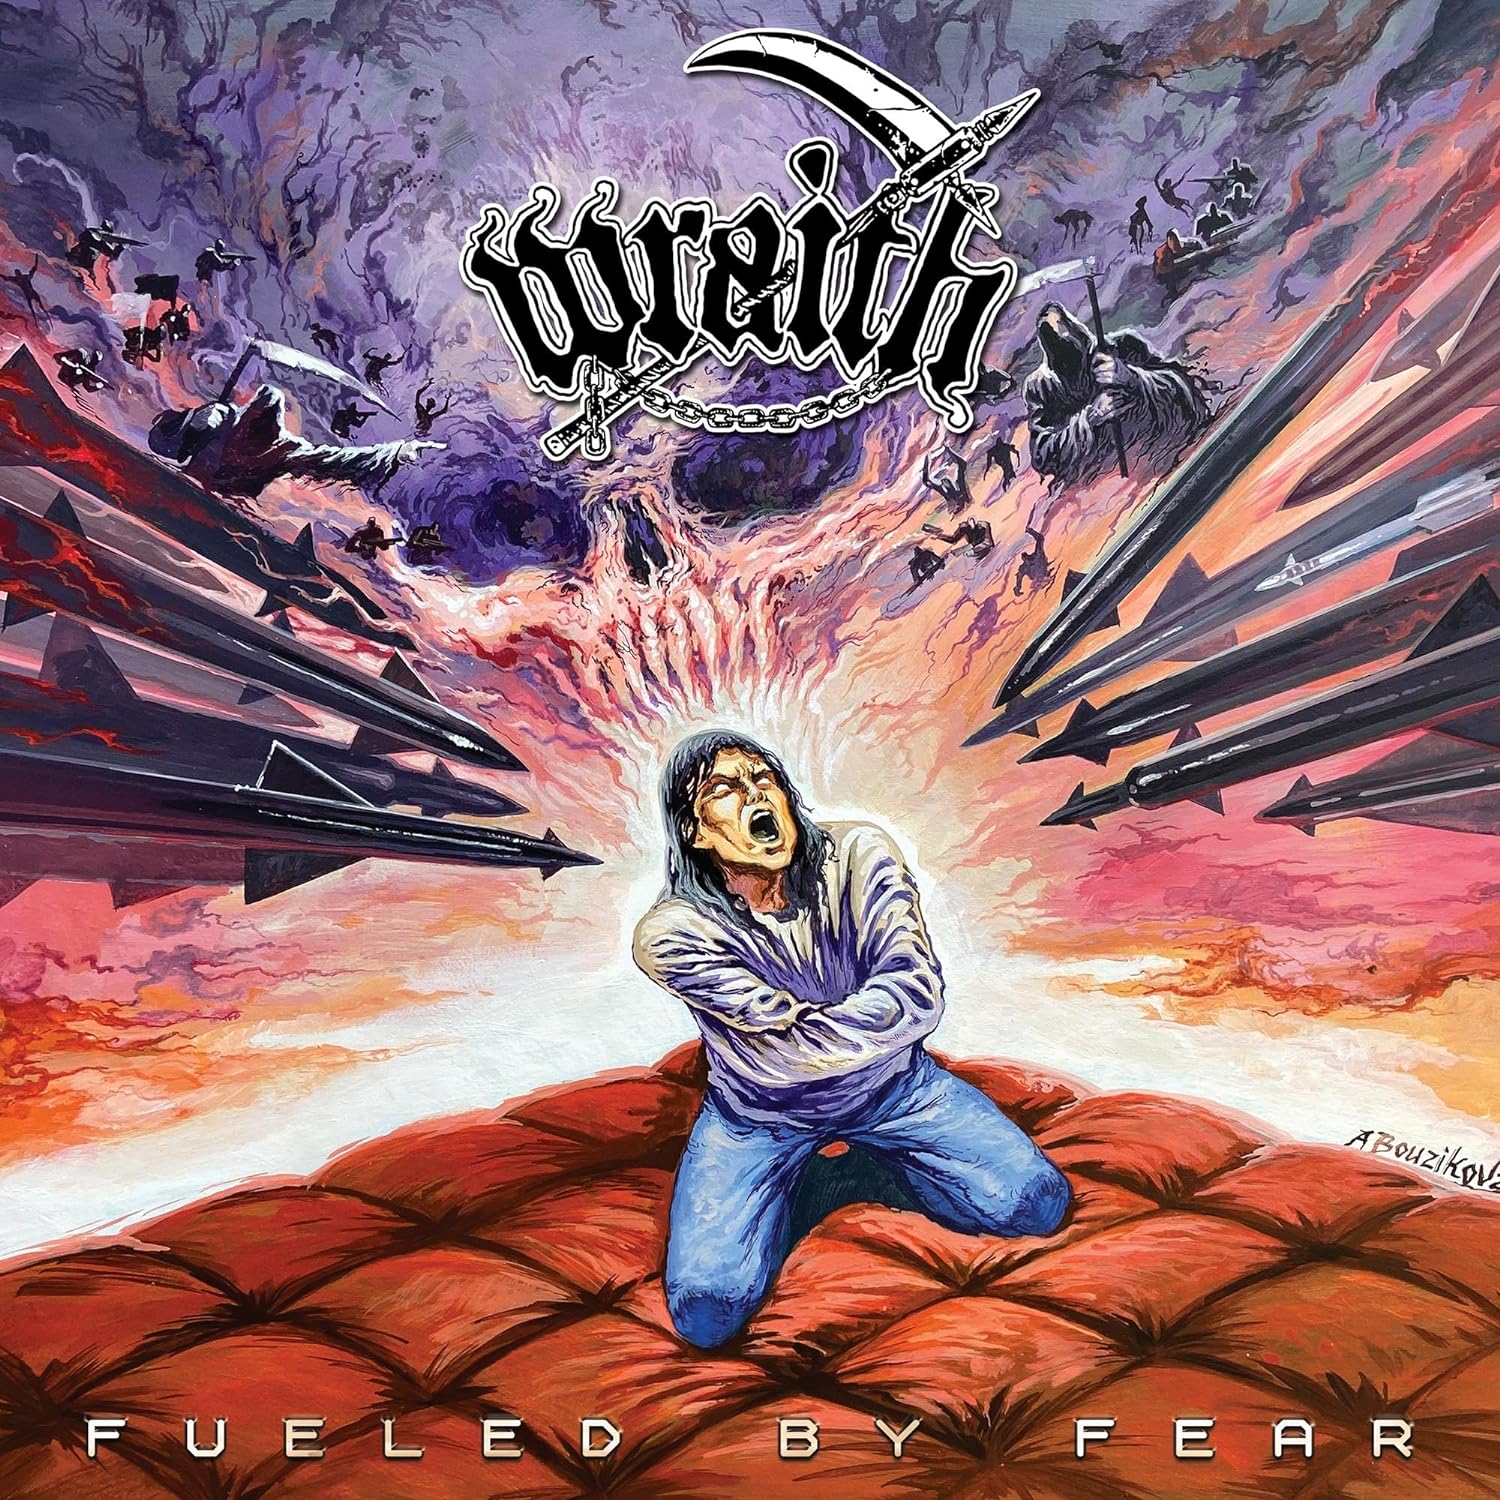 Wraith "Fueled By Fear" CD - PRE-ORDER